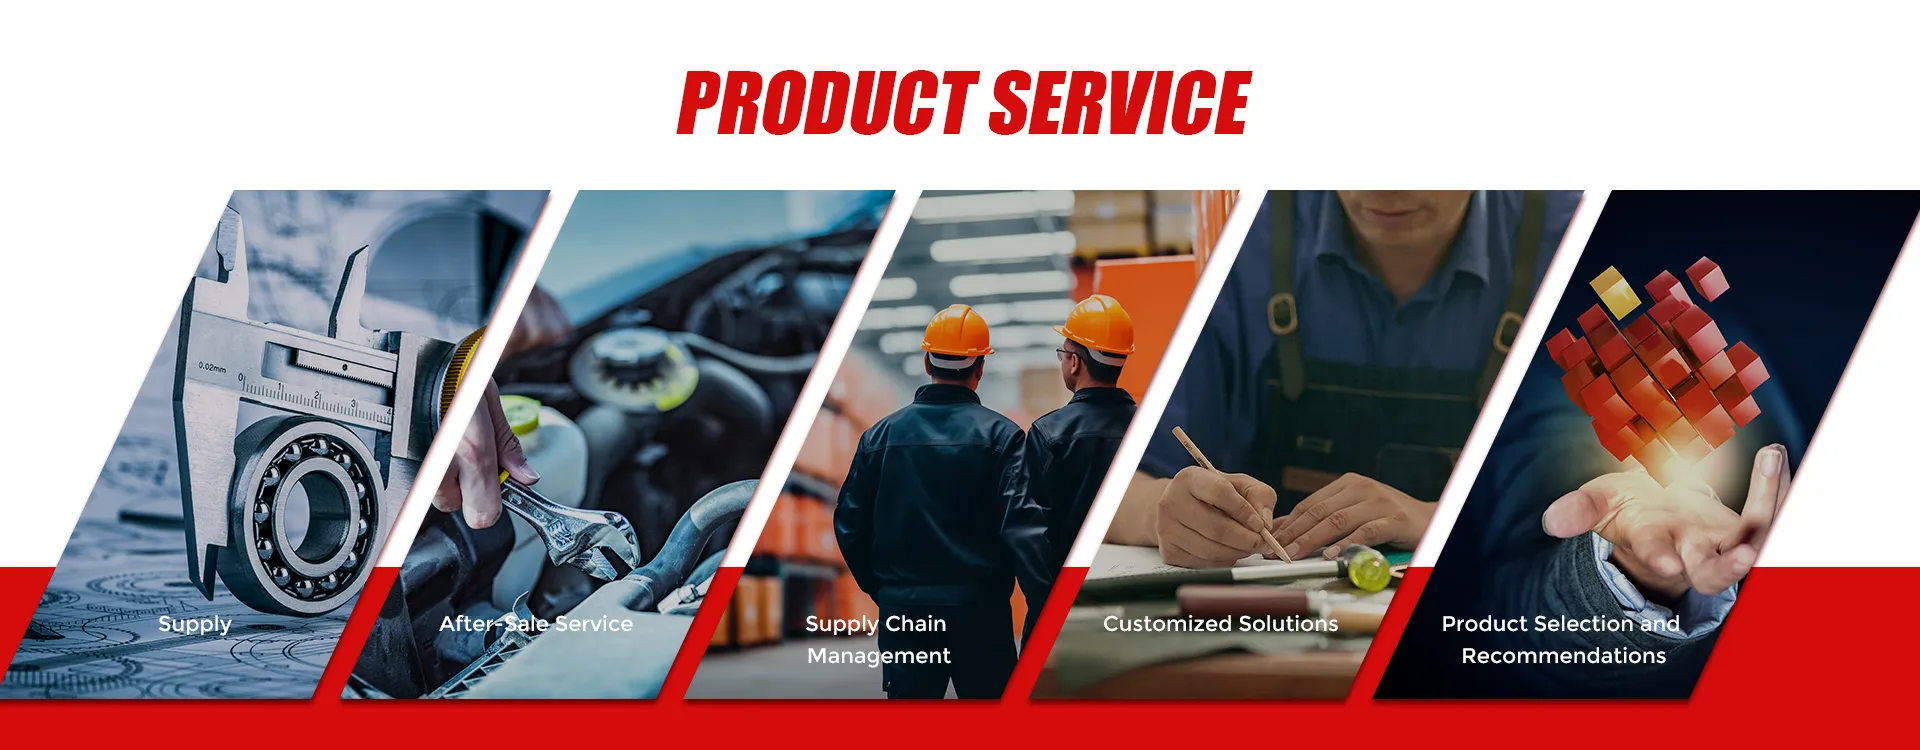 PRODUCT SERVICE